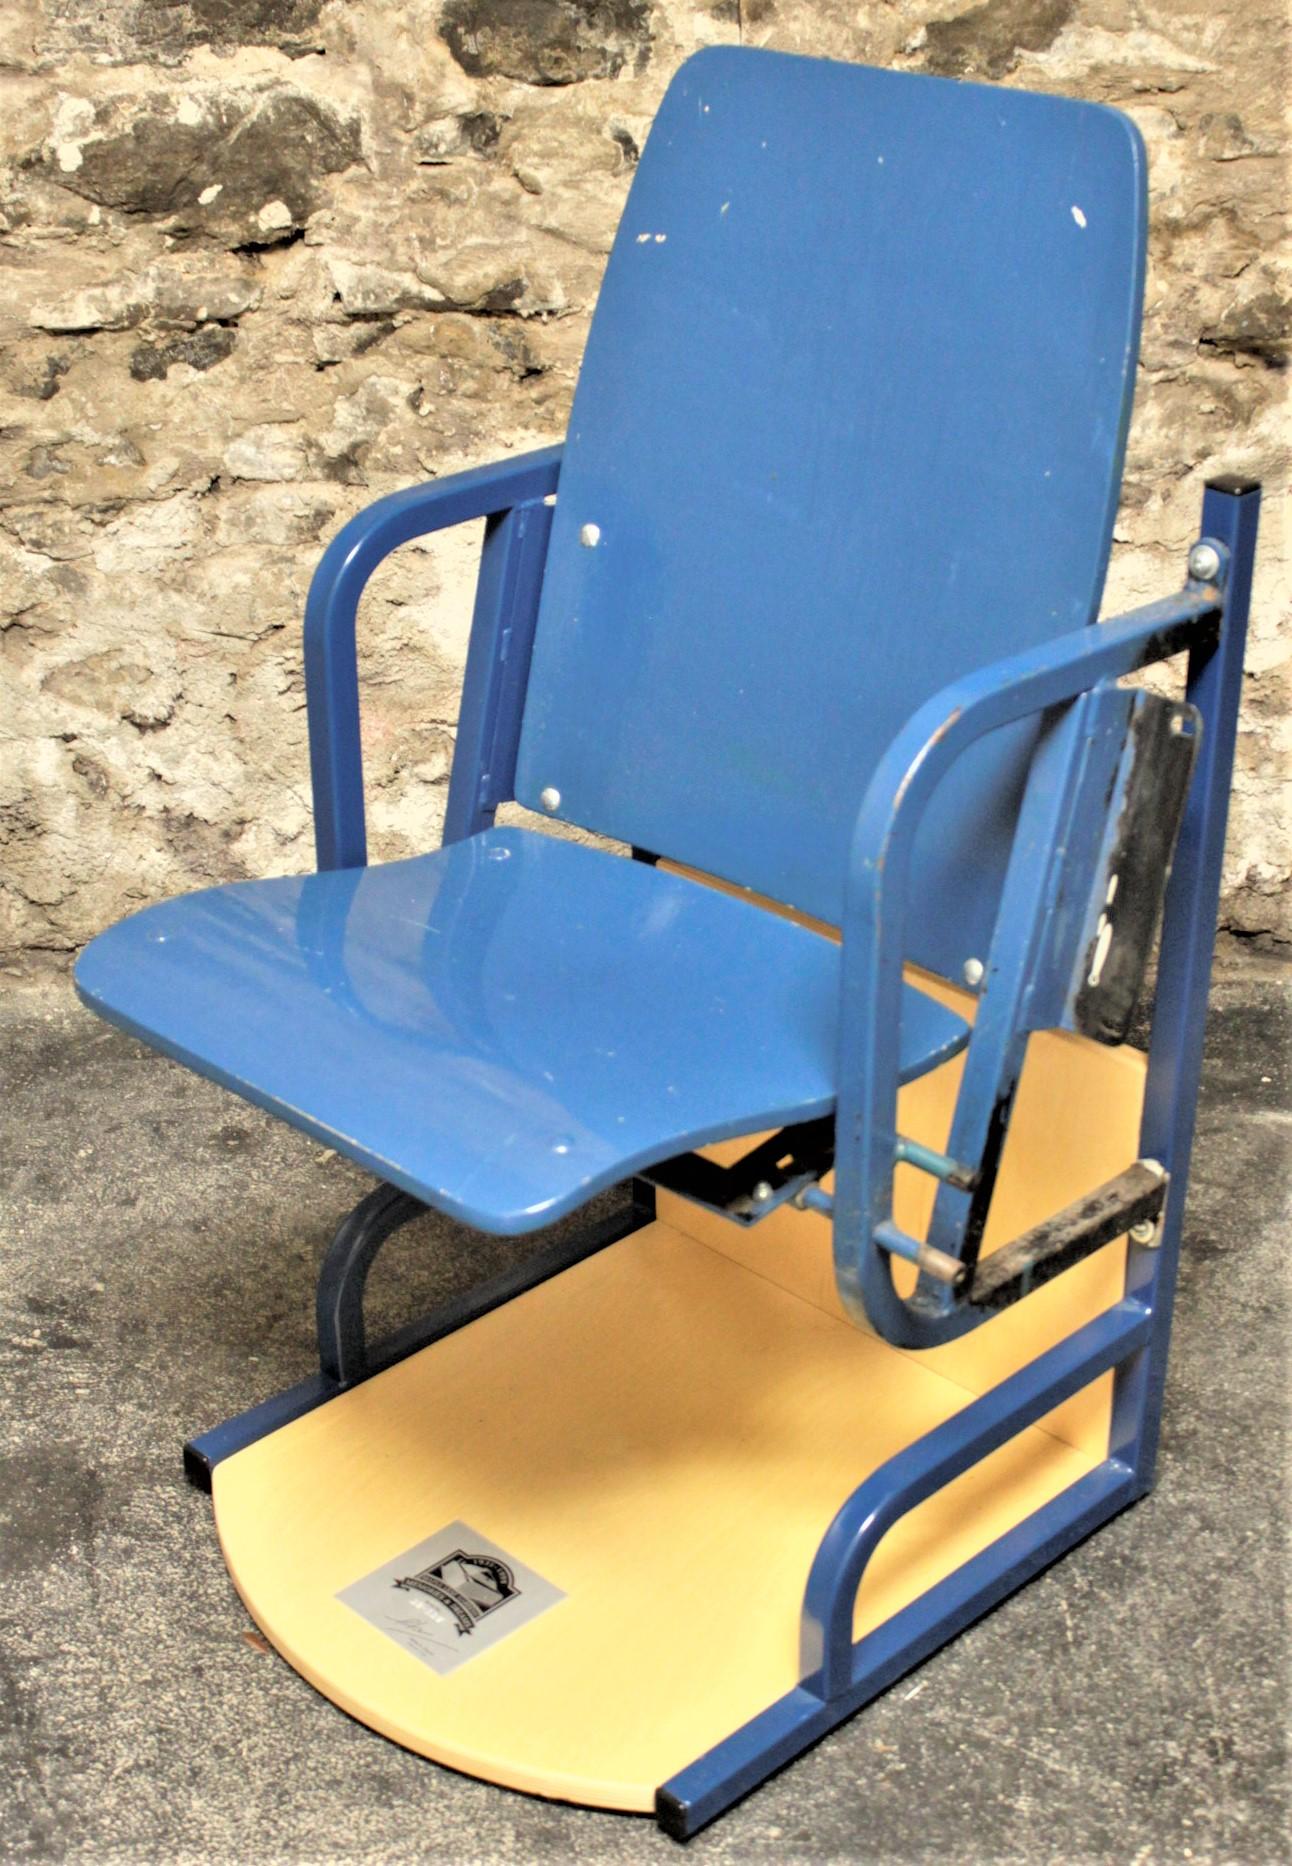 This is an authentic seat from the Maple Leaf gardens arena where the Toronto Maple leafs once played on won several Stanley cups. The actual maker of the seat is unknown, but presumed to have been made in North America in circa 1985. The seat